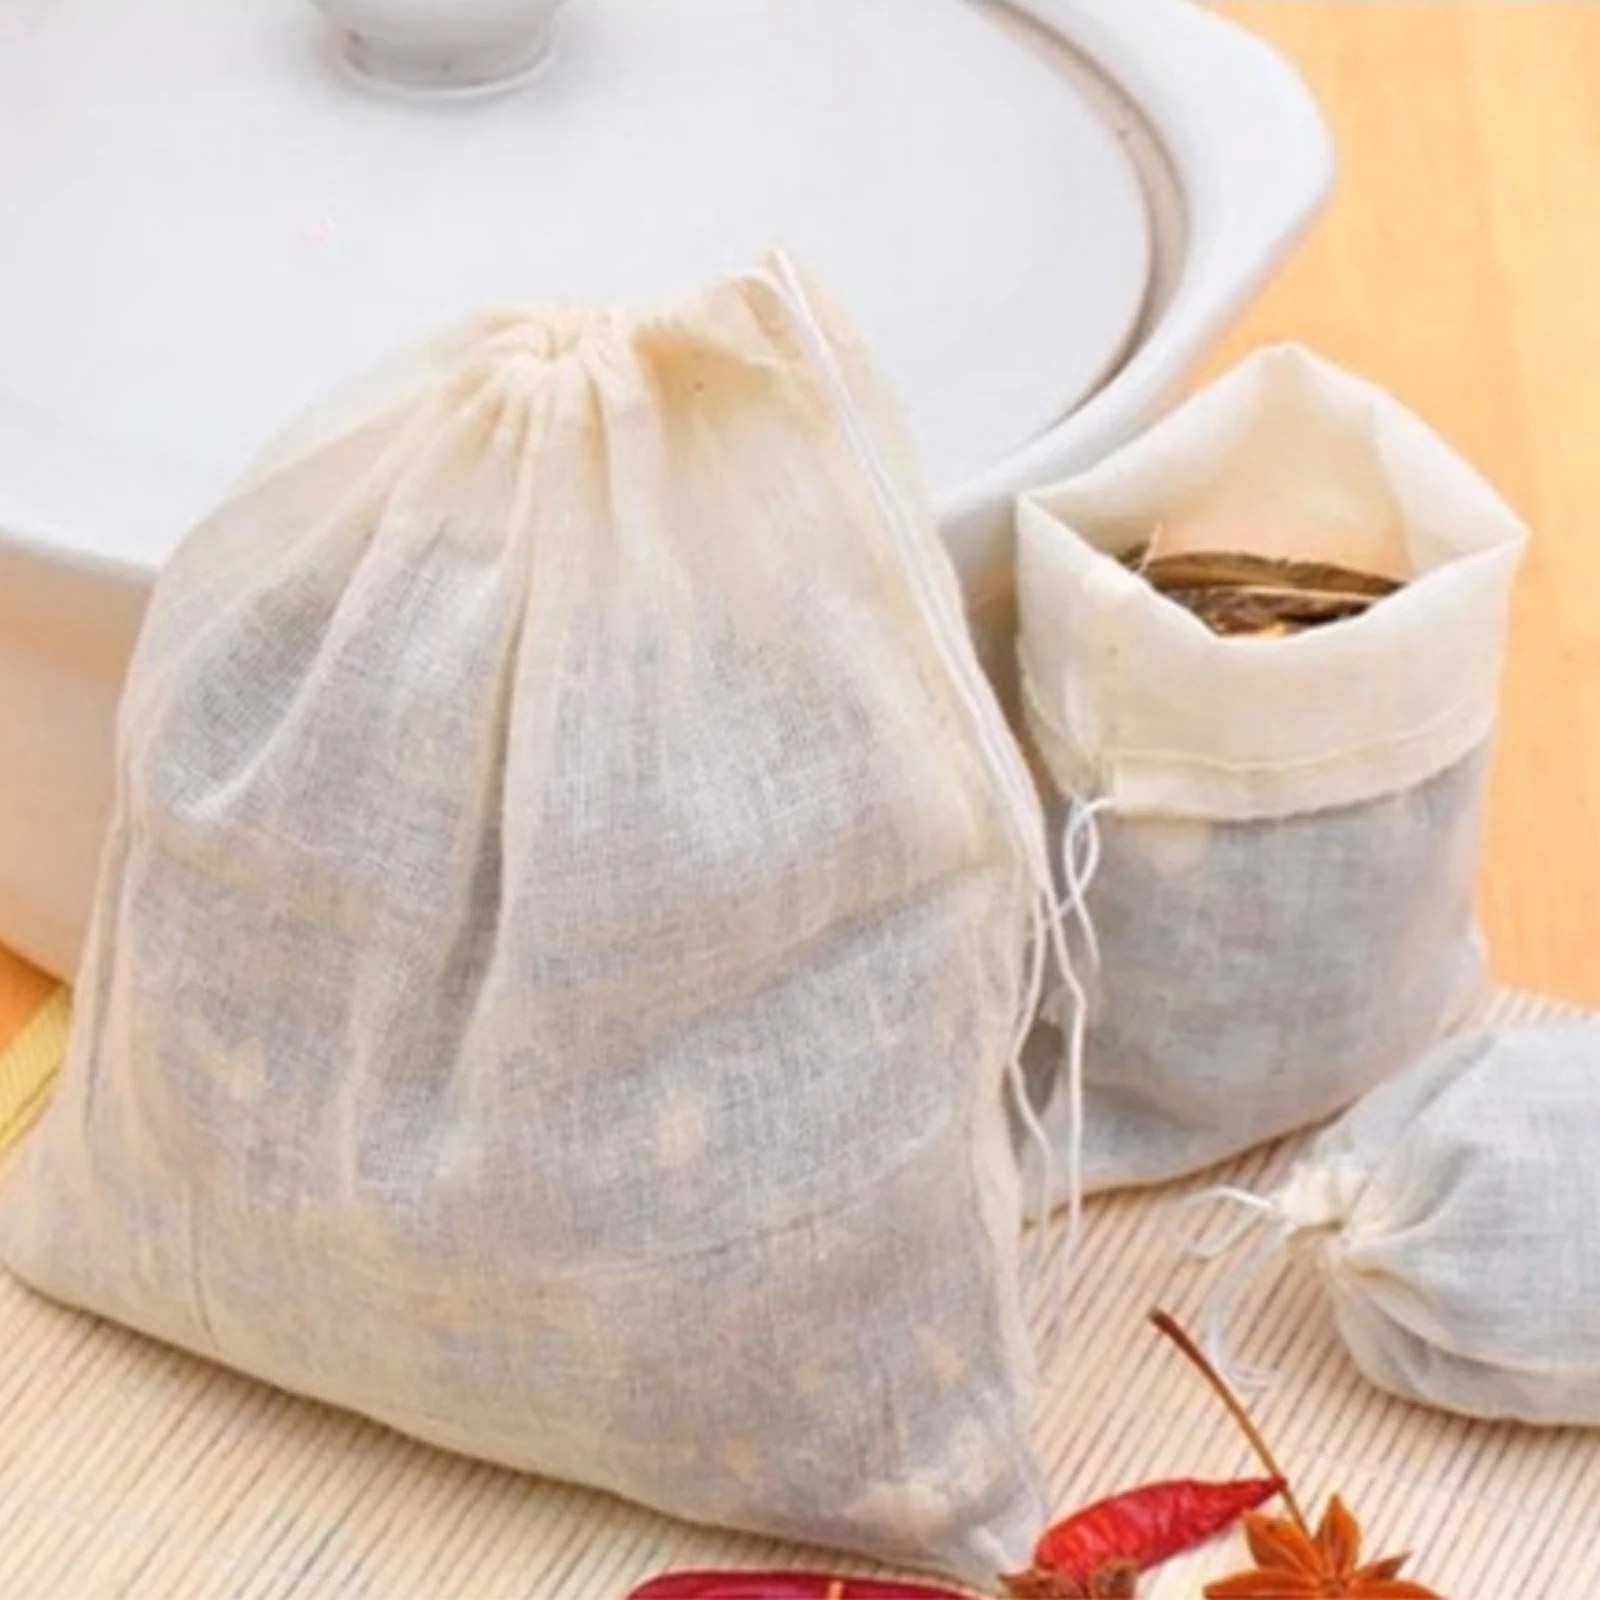 4x3 Inches 100 Pieces Cheesecloth Bags Tea Strainer Bags Reusable Coffee Tea Brew Herb Bags Cotton Muslin Drawstring Bags Mesh Filter Bags for Office Home Kitchen CA 